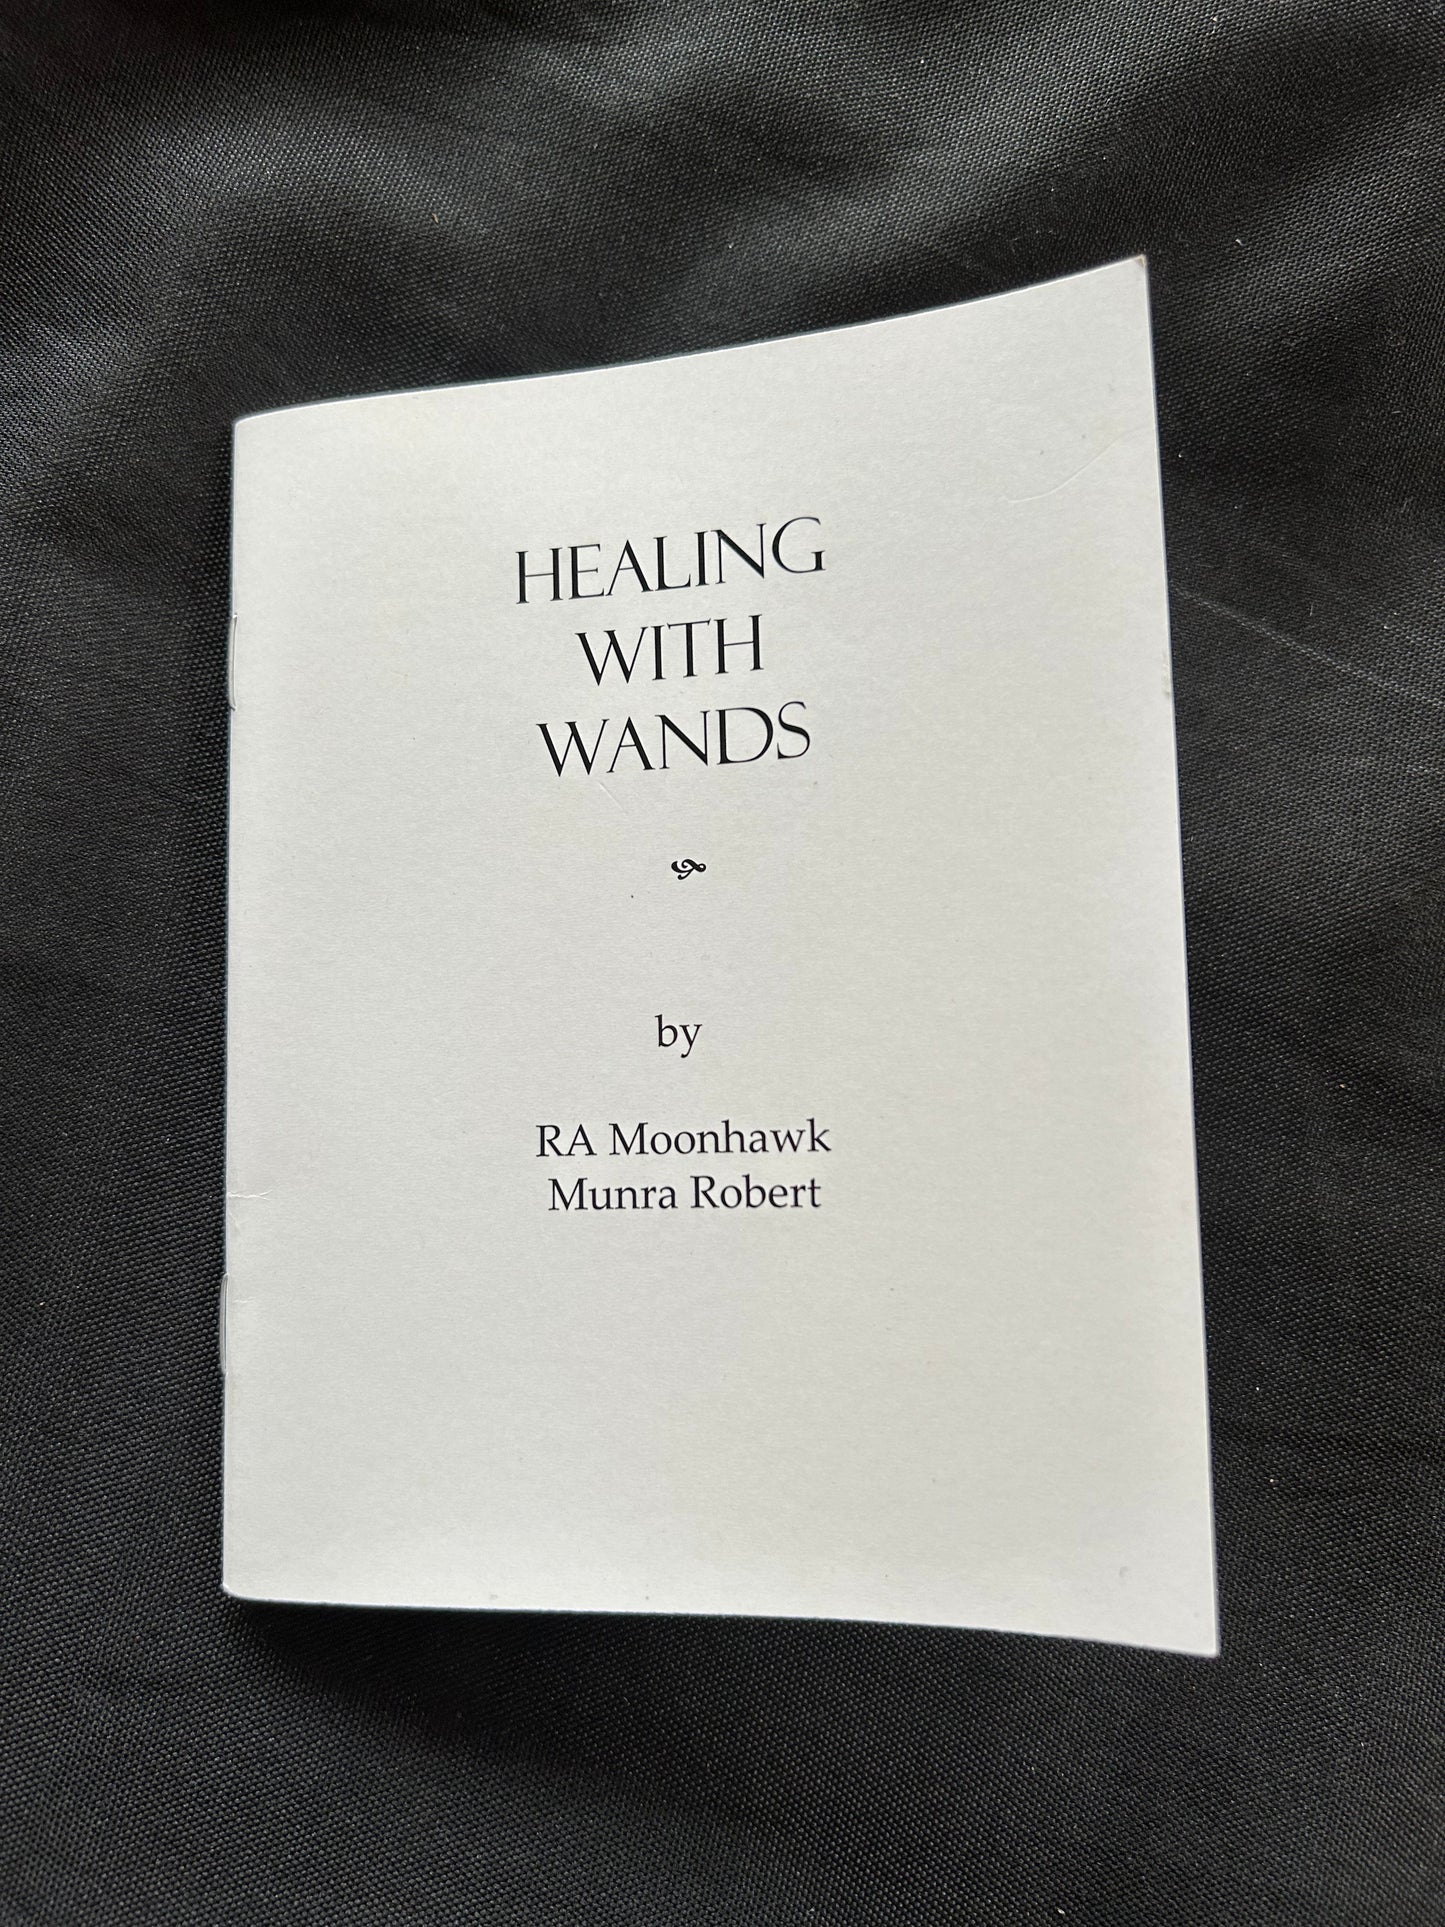 Healing with Wands